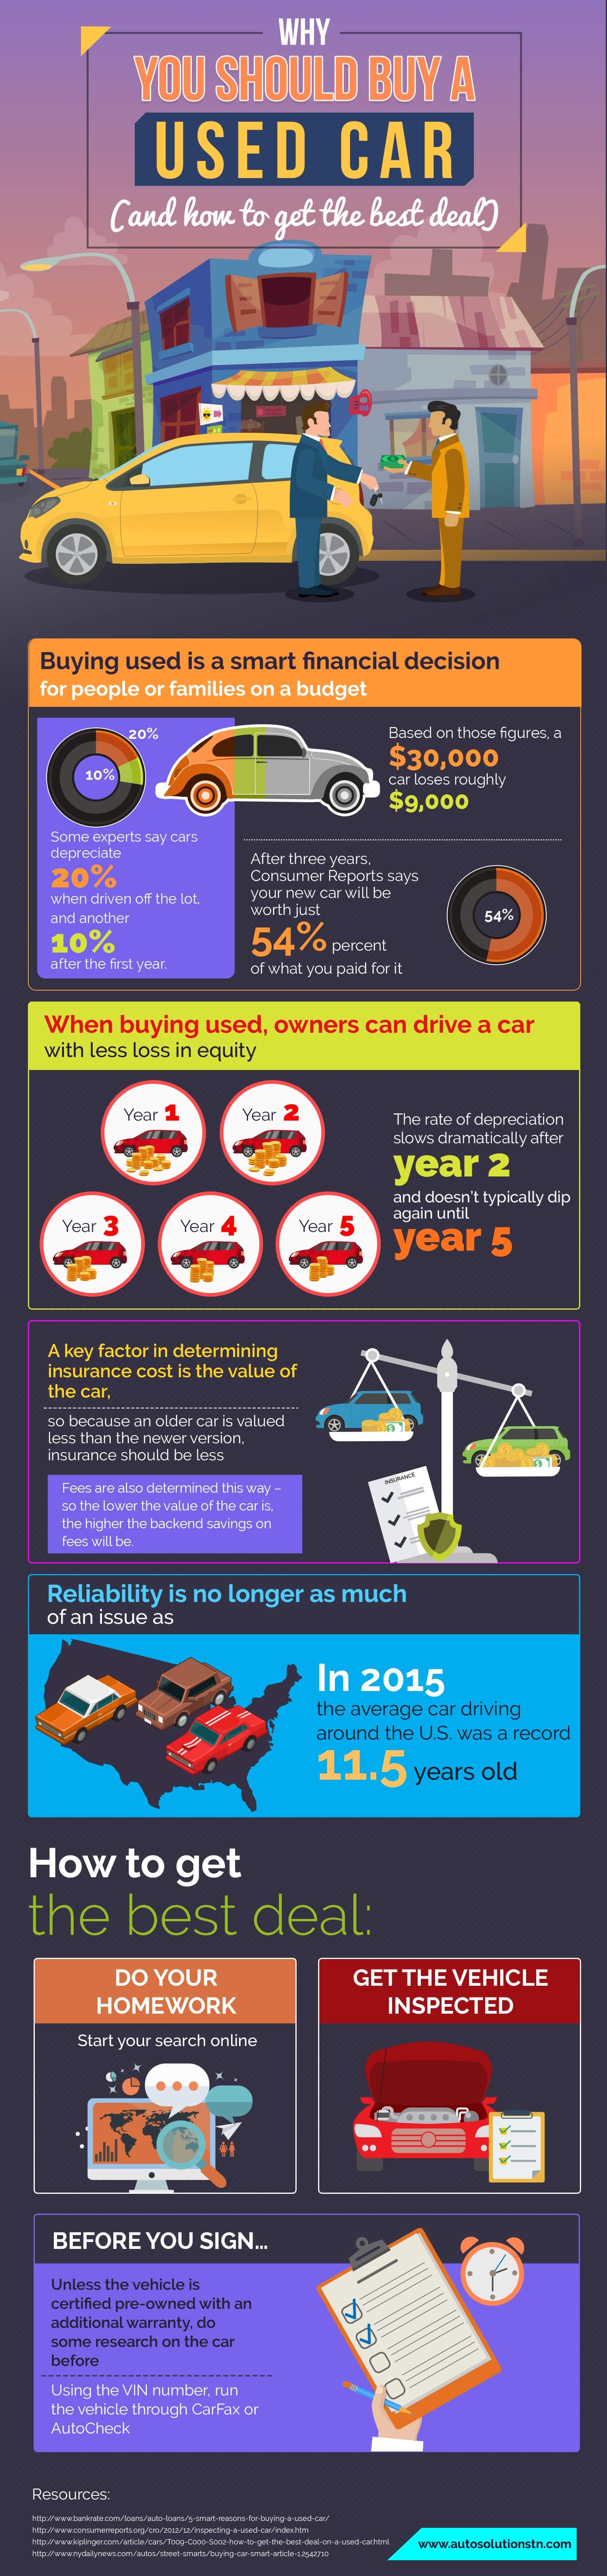 Why You Should Buy a Used Car